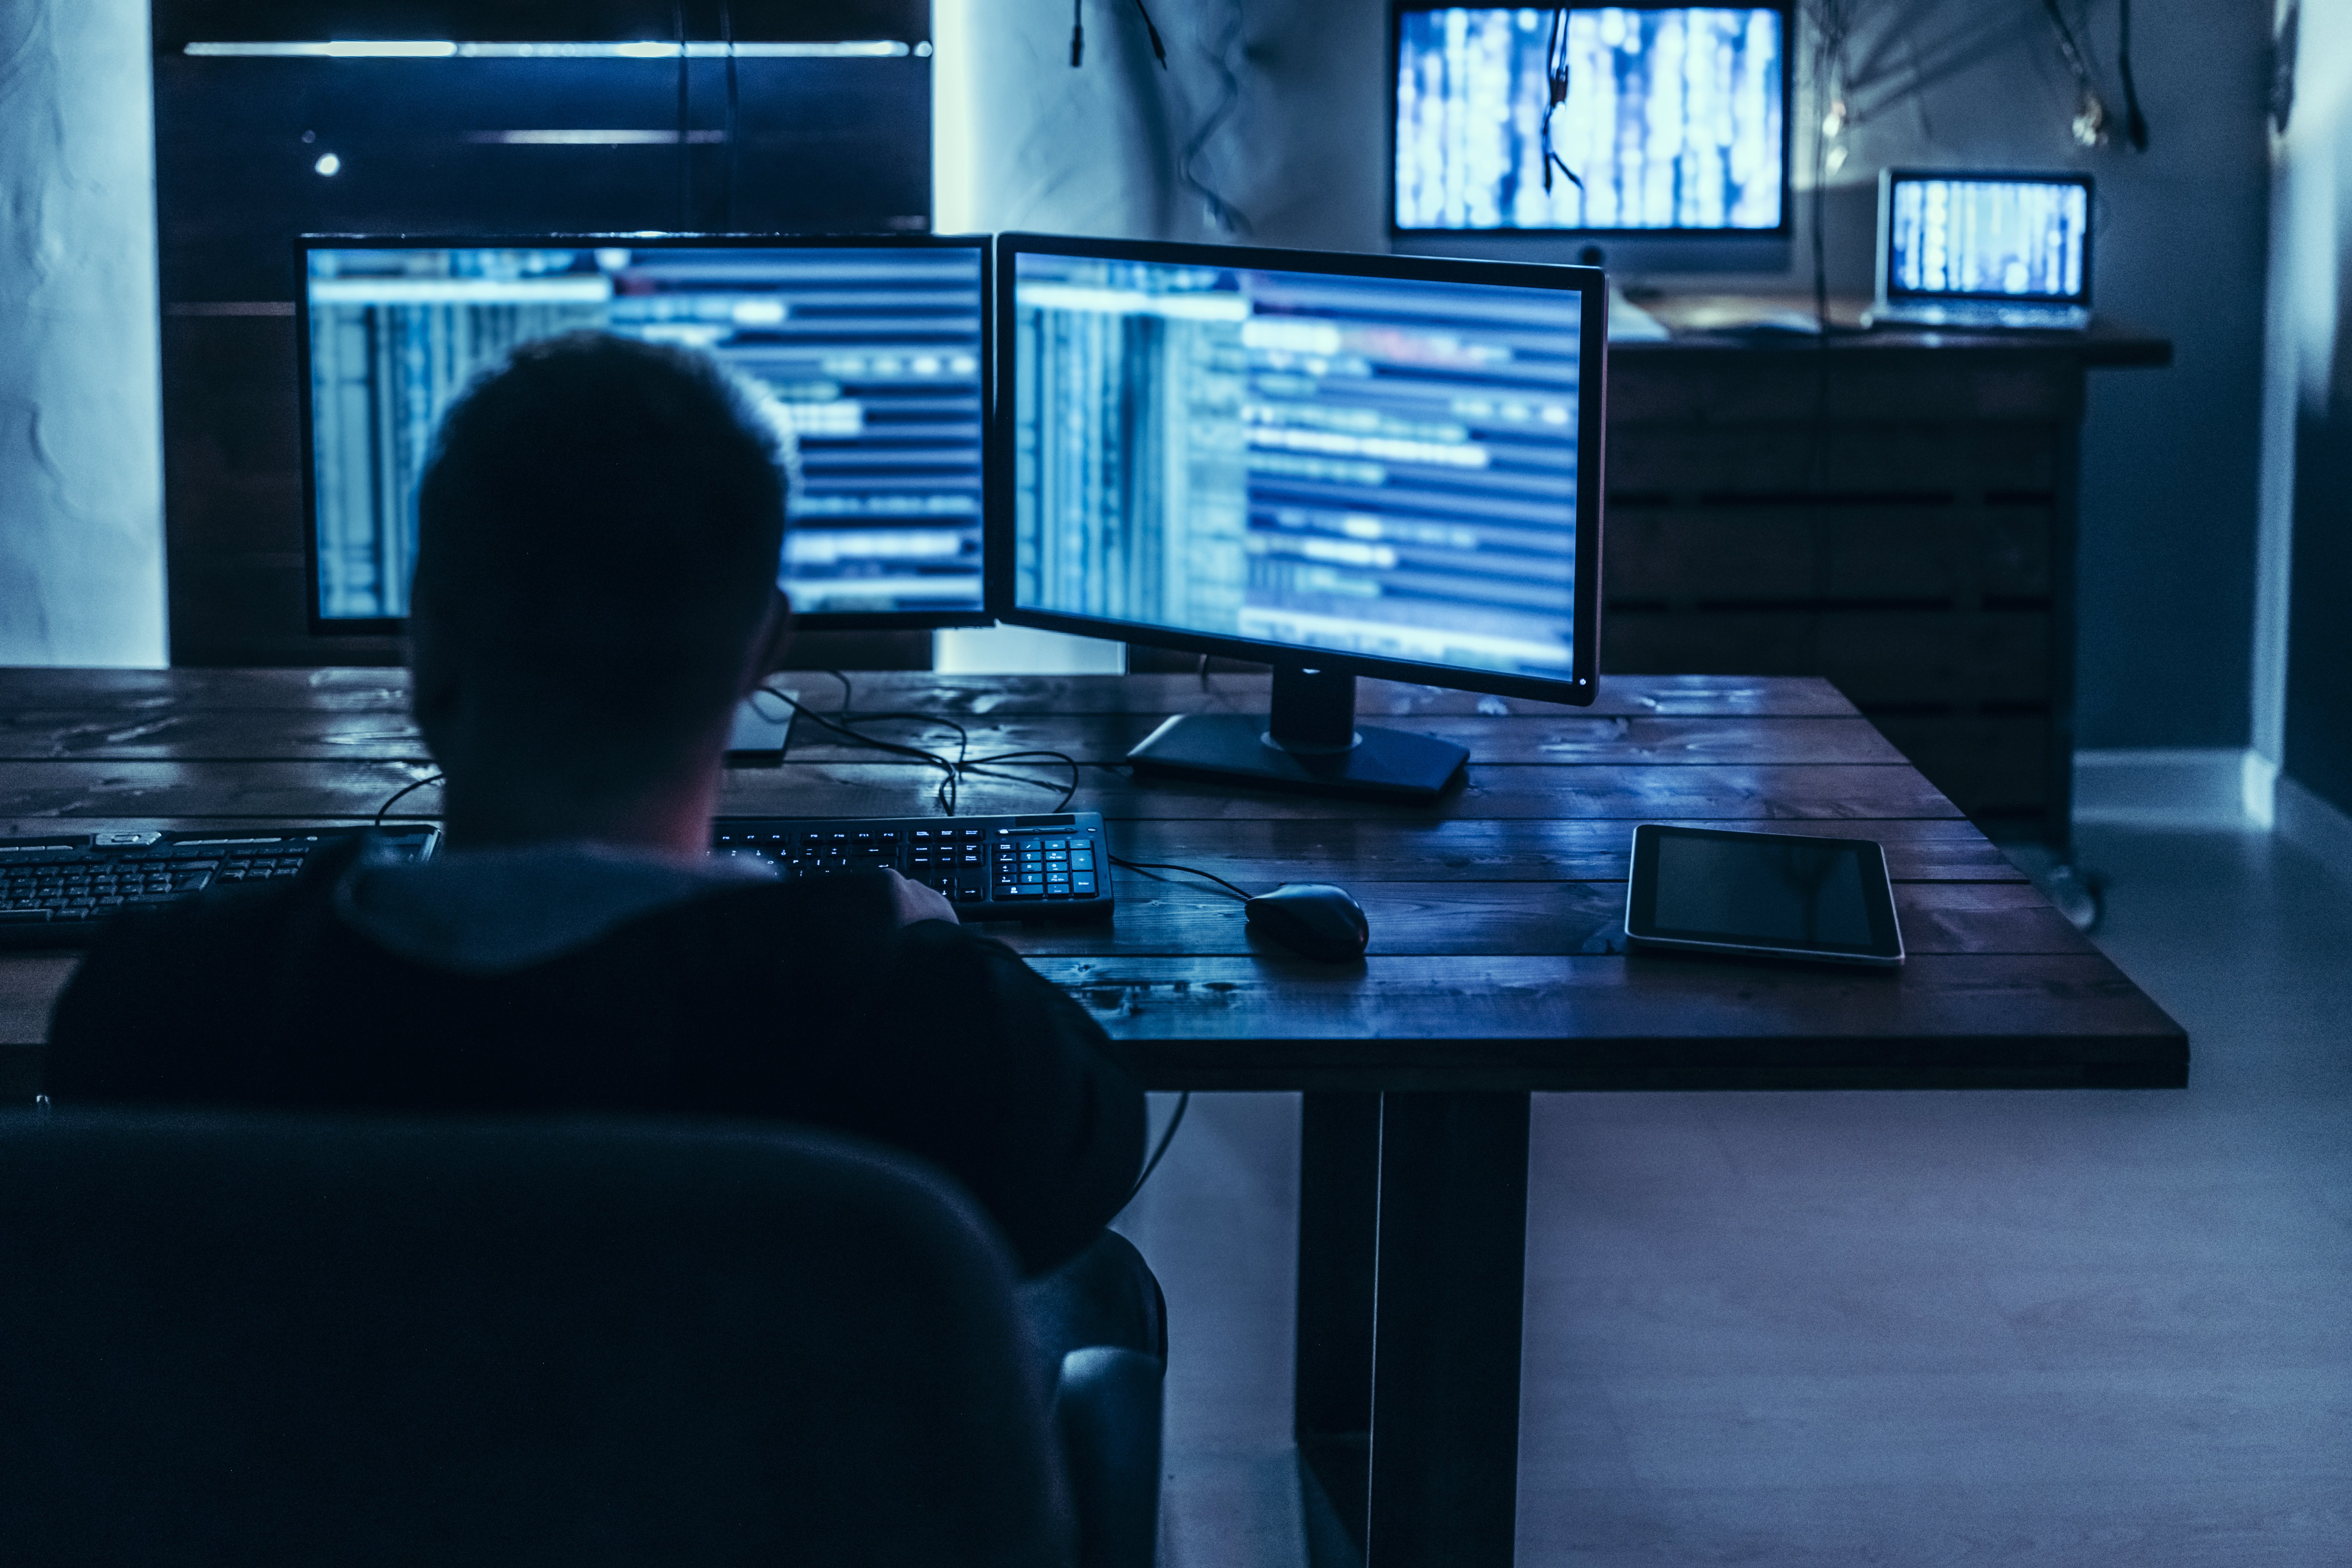 Penetration Testing: Why it's Needed and What to Look For in a Penetration Test